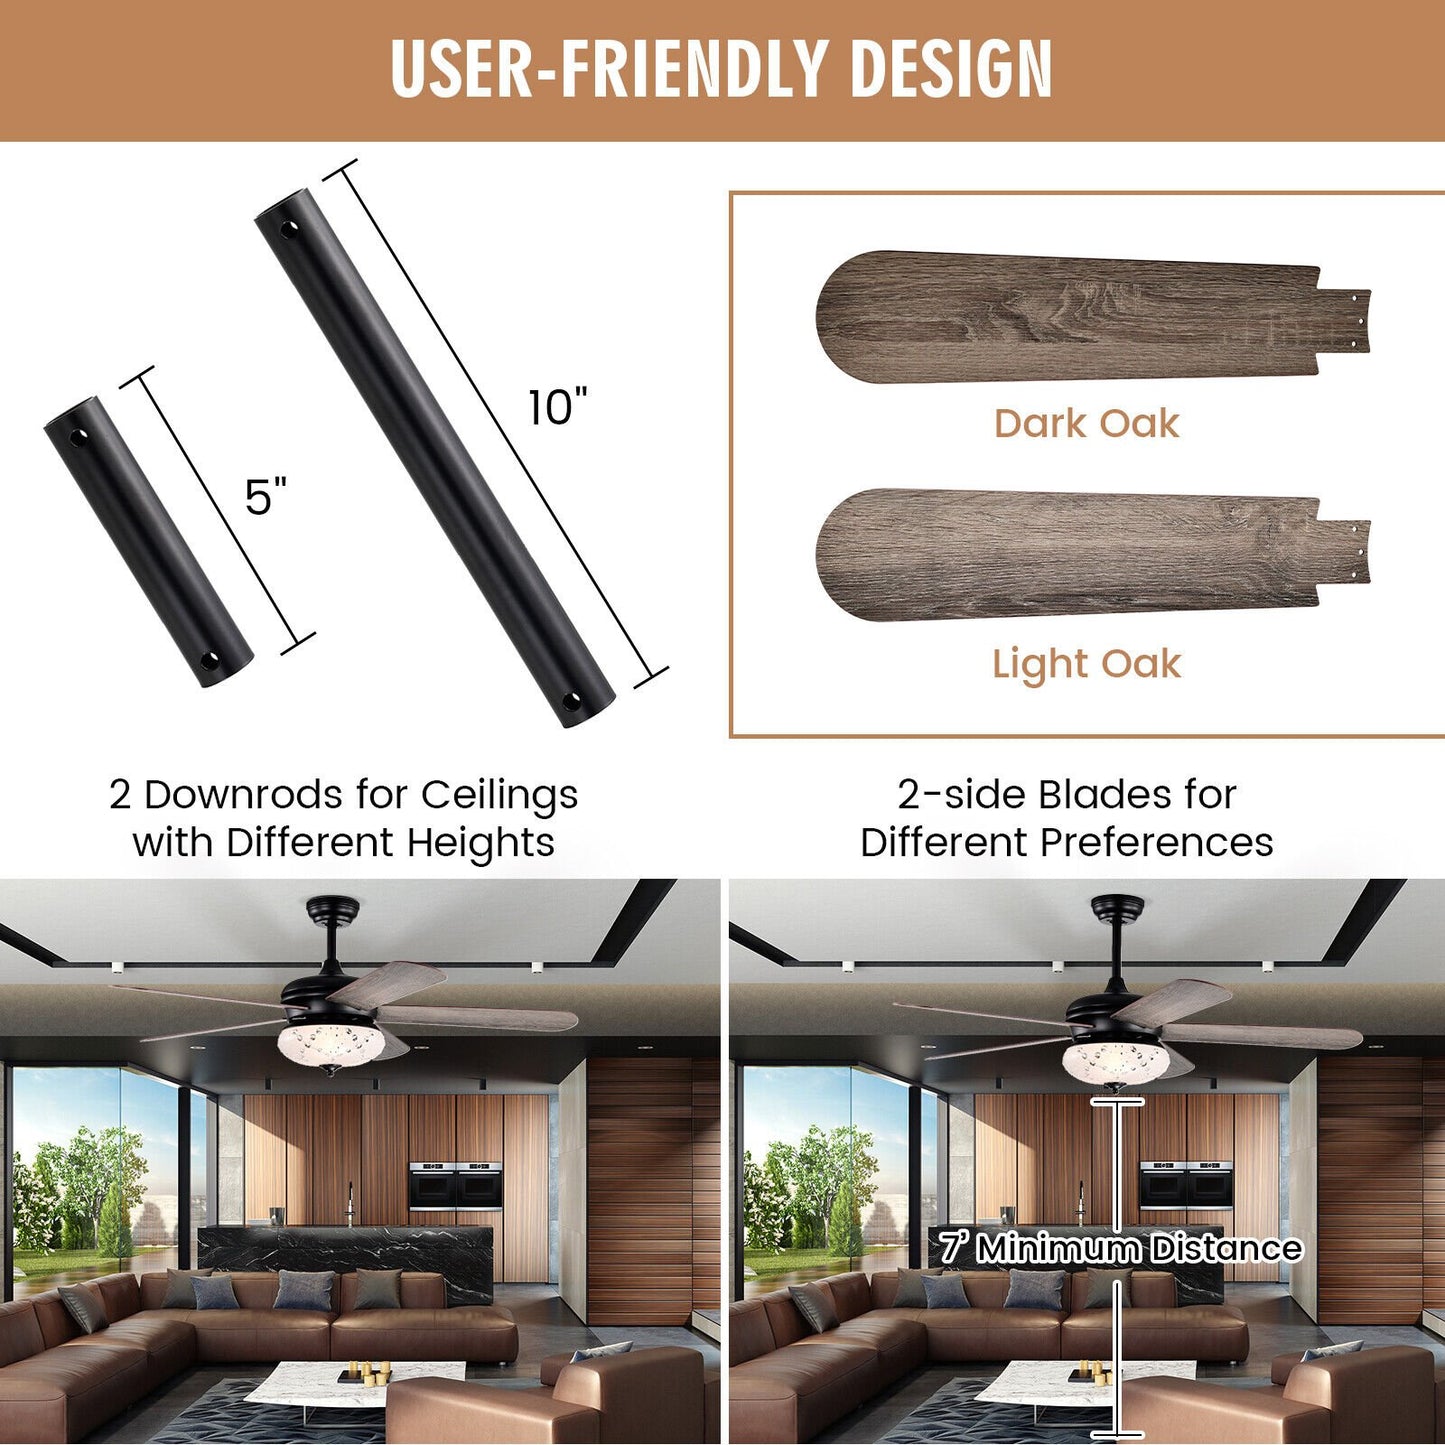 52 Inches Ceiling Fan with Remote Control, Oak